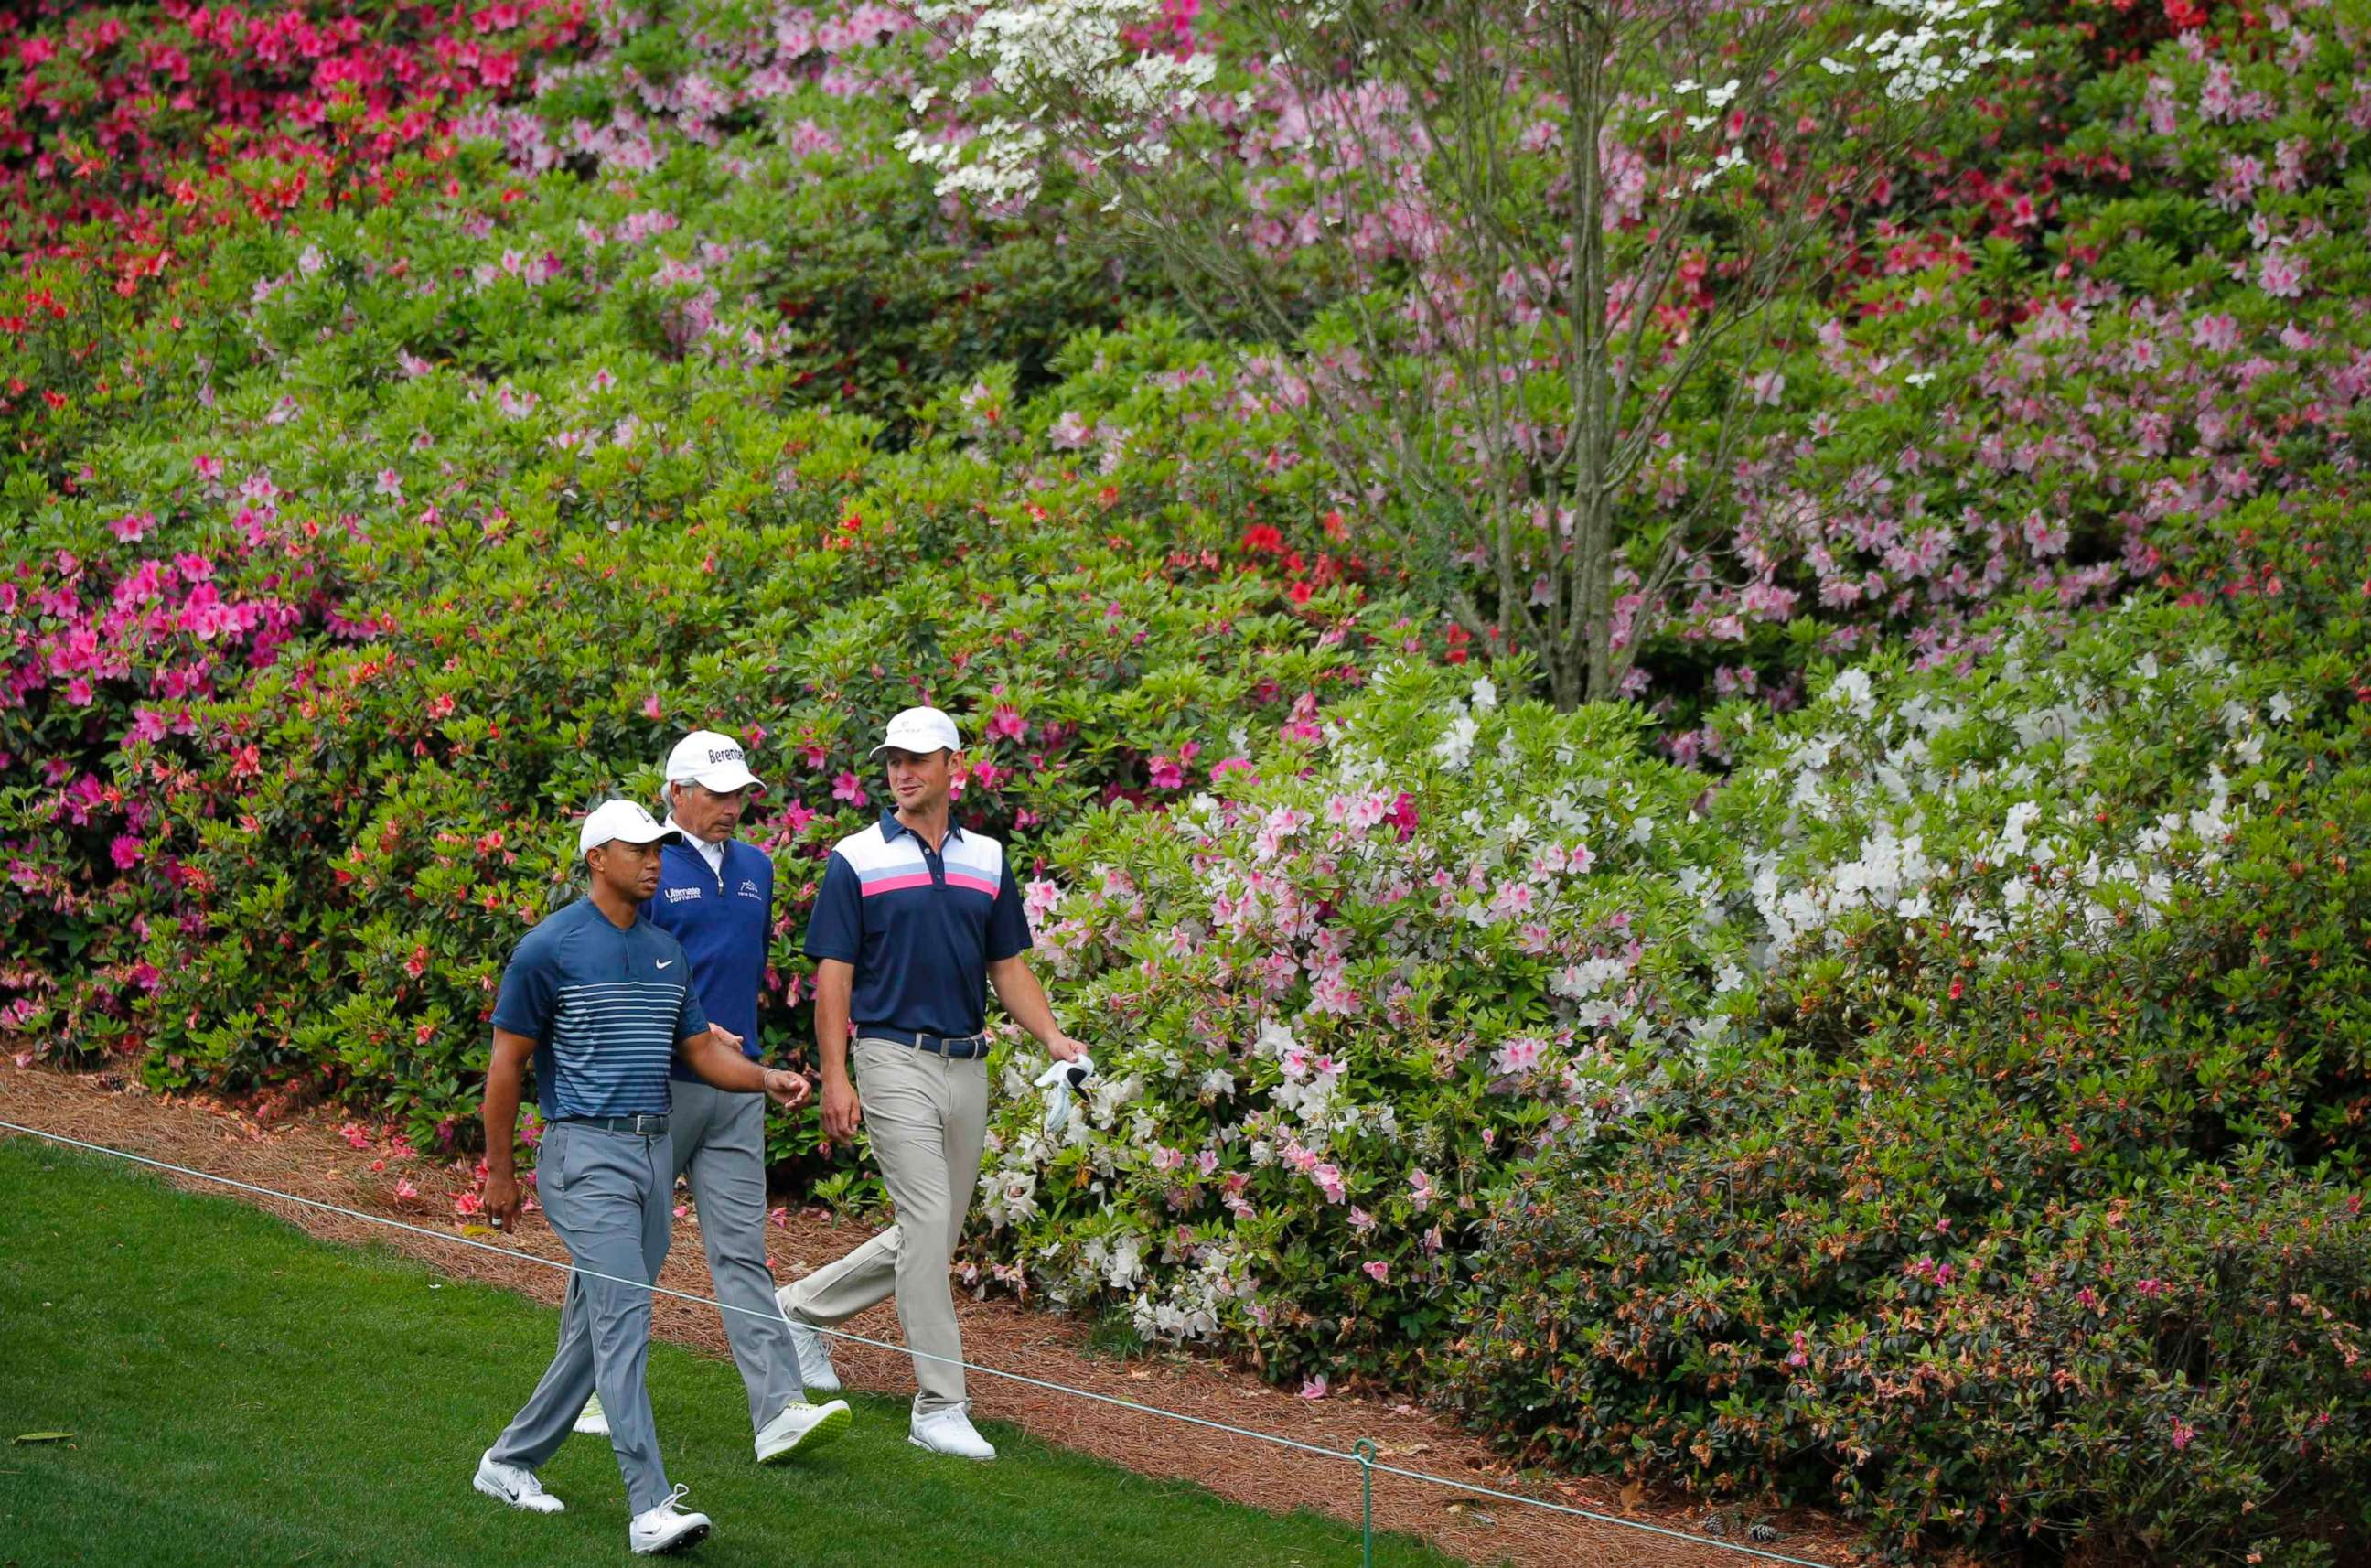 PHOTO: Tiger Woods, Fred Couples and Matt Parziale walk to the 6th green during the final day of practice, April 4, 2018, at Augusta National Golf Club in Augusta, Georgia.